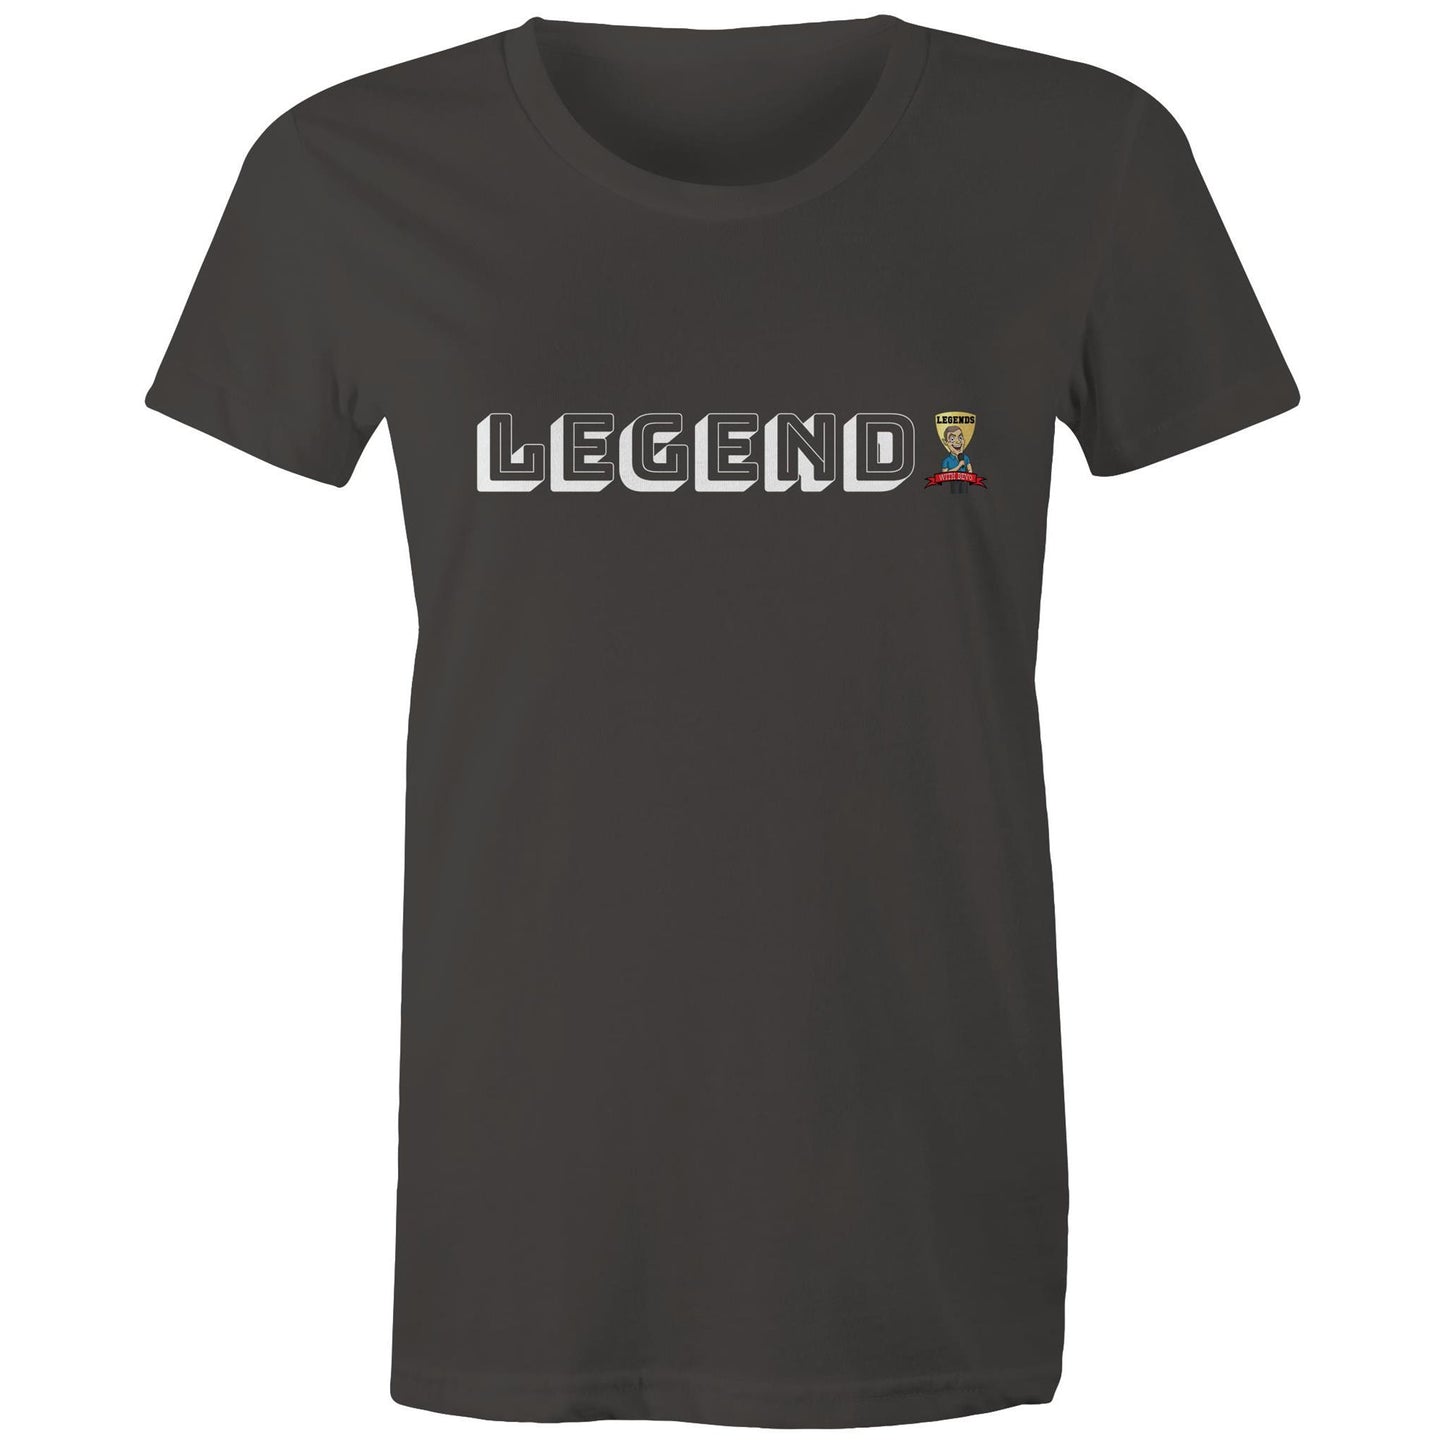 "LEGEND" Legends with Bevo - AS Colour - Women's Maple Tee